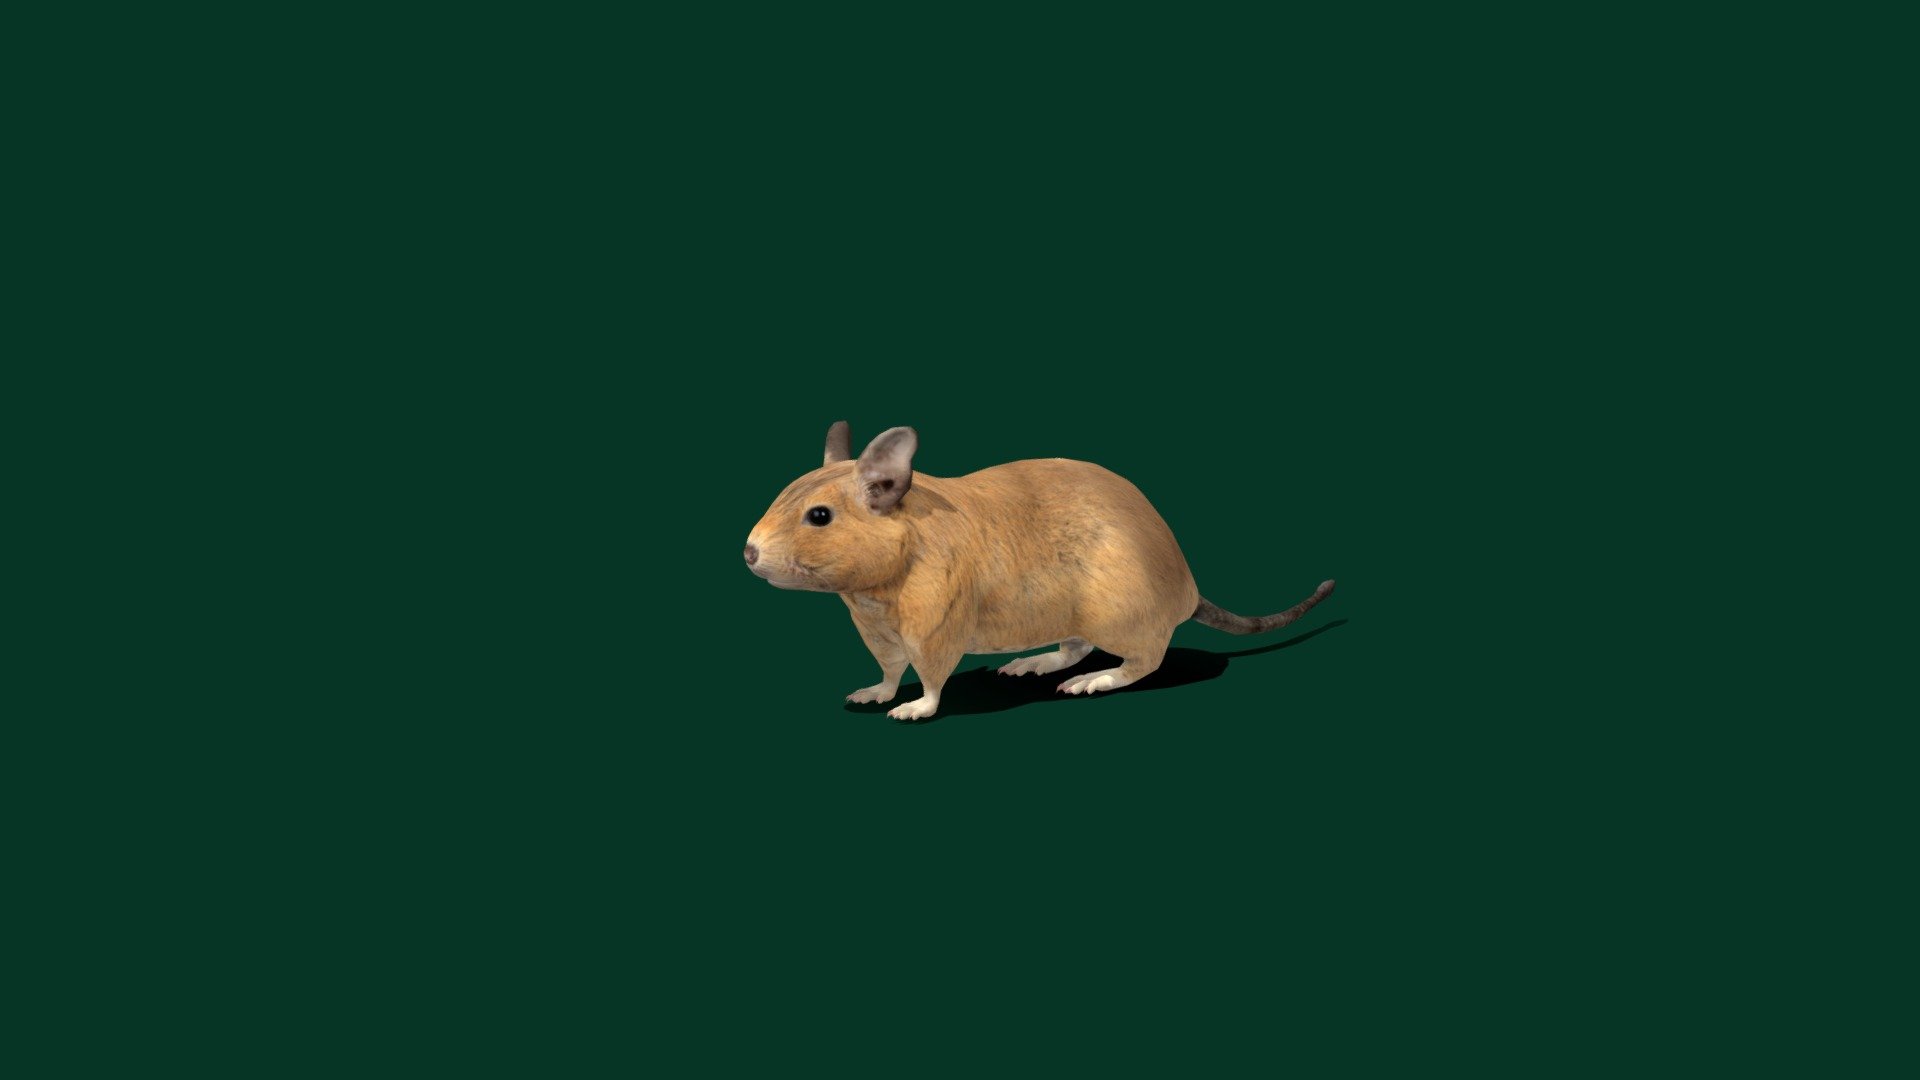 Common Degu Rat (Degu Rodents)  Dewu

Octodontidae Degu  (Domestic Pet )

1 Draw Calls

GameReady 

6 Animation

4K PBR Textures Material

Unreal FBX

Unity FBX  

Blend File 

USDZ File (AR Ready). Real Scale Dimension

Textures Files

GLB File

Gltf File ( Spark AR, Lens Studio(SnapChat) , Effector(Tiktok) , Spline, Play Canvas ) Compatible



Triangles: 7784

Vertices: 3910

Diffuse , Metallic, Roughness , Normal Map ,Specular Map,AO
Octodontidae is a family of rodents, restricted to southwestern South America. Fourteen species of octodontid are recognised, arranged in seven genera. The best known species is the common degu, Octodon degus. Octodontids are medium-sized rodents, ranging from 12 to 20 cm in body length. Wikipedia
Lifespan: Common degu: 5 – 9 years
Gestation period: Common degu: 90 days
Scientific name: Octodontidae
Family: Octodontidae; Waterhouse, 1839 - Common Degu (Lowpoly) - 3D model by Nyilonelycompany 3d model